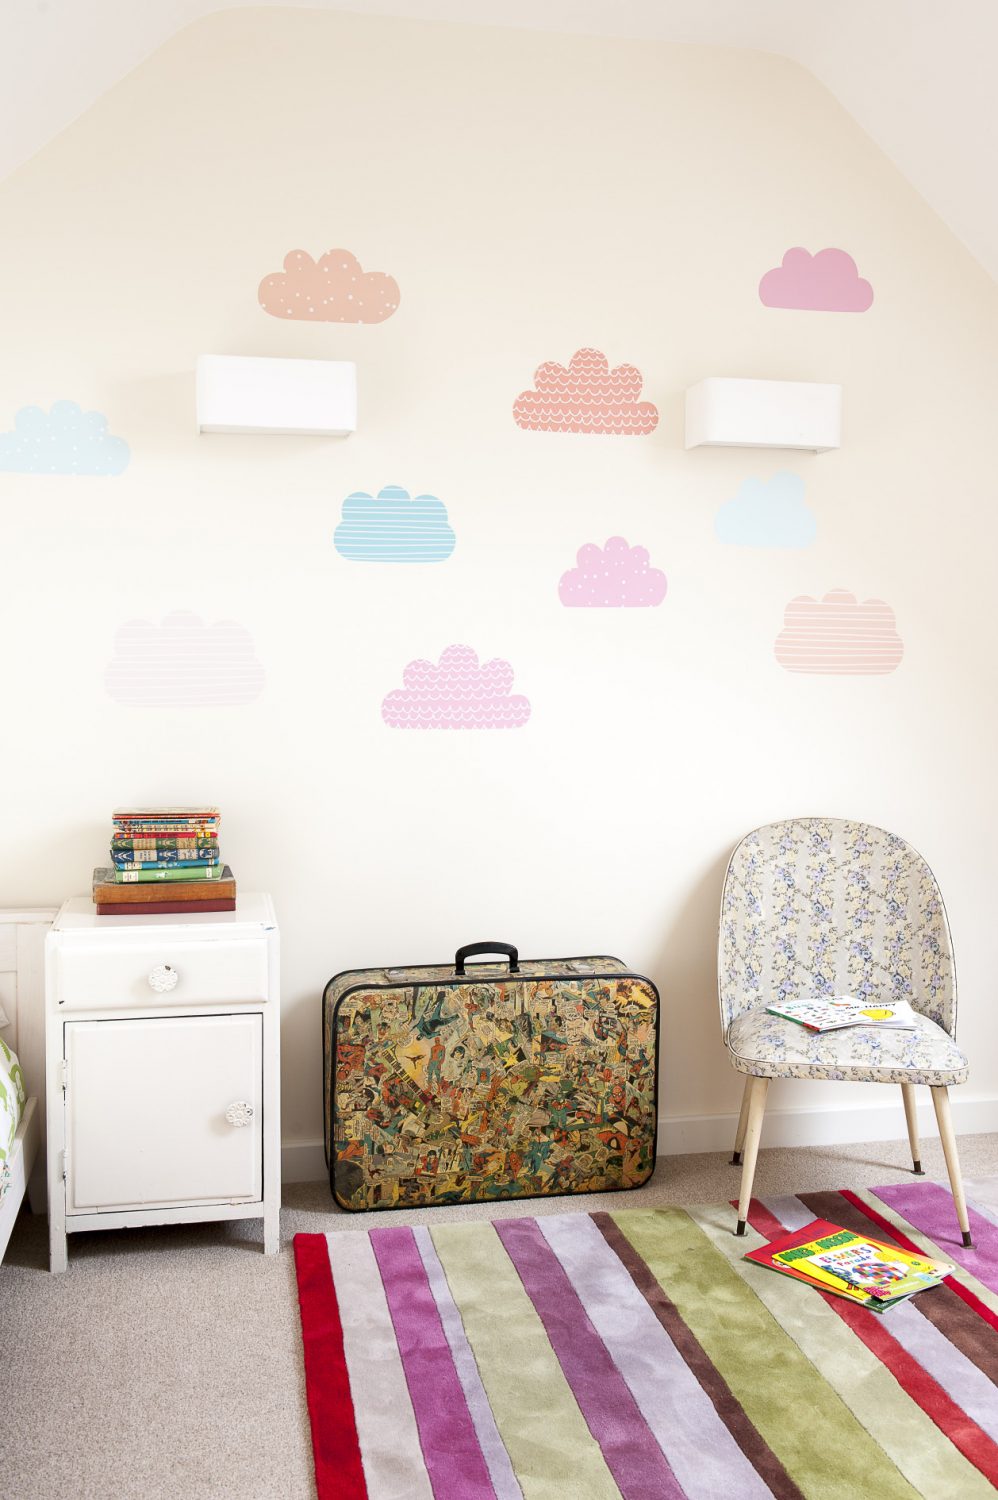 Pastel paper clouds float across one wall of the children’s guest room at the top of the house